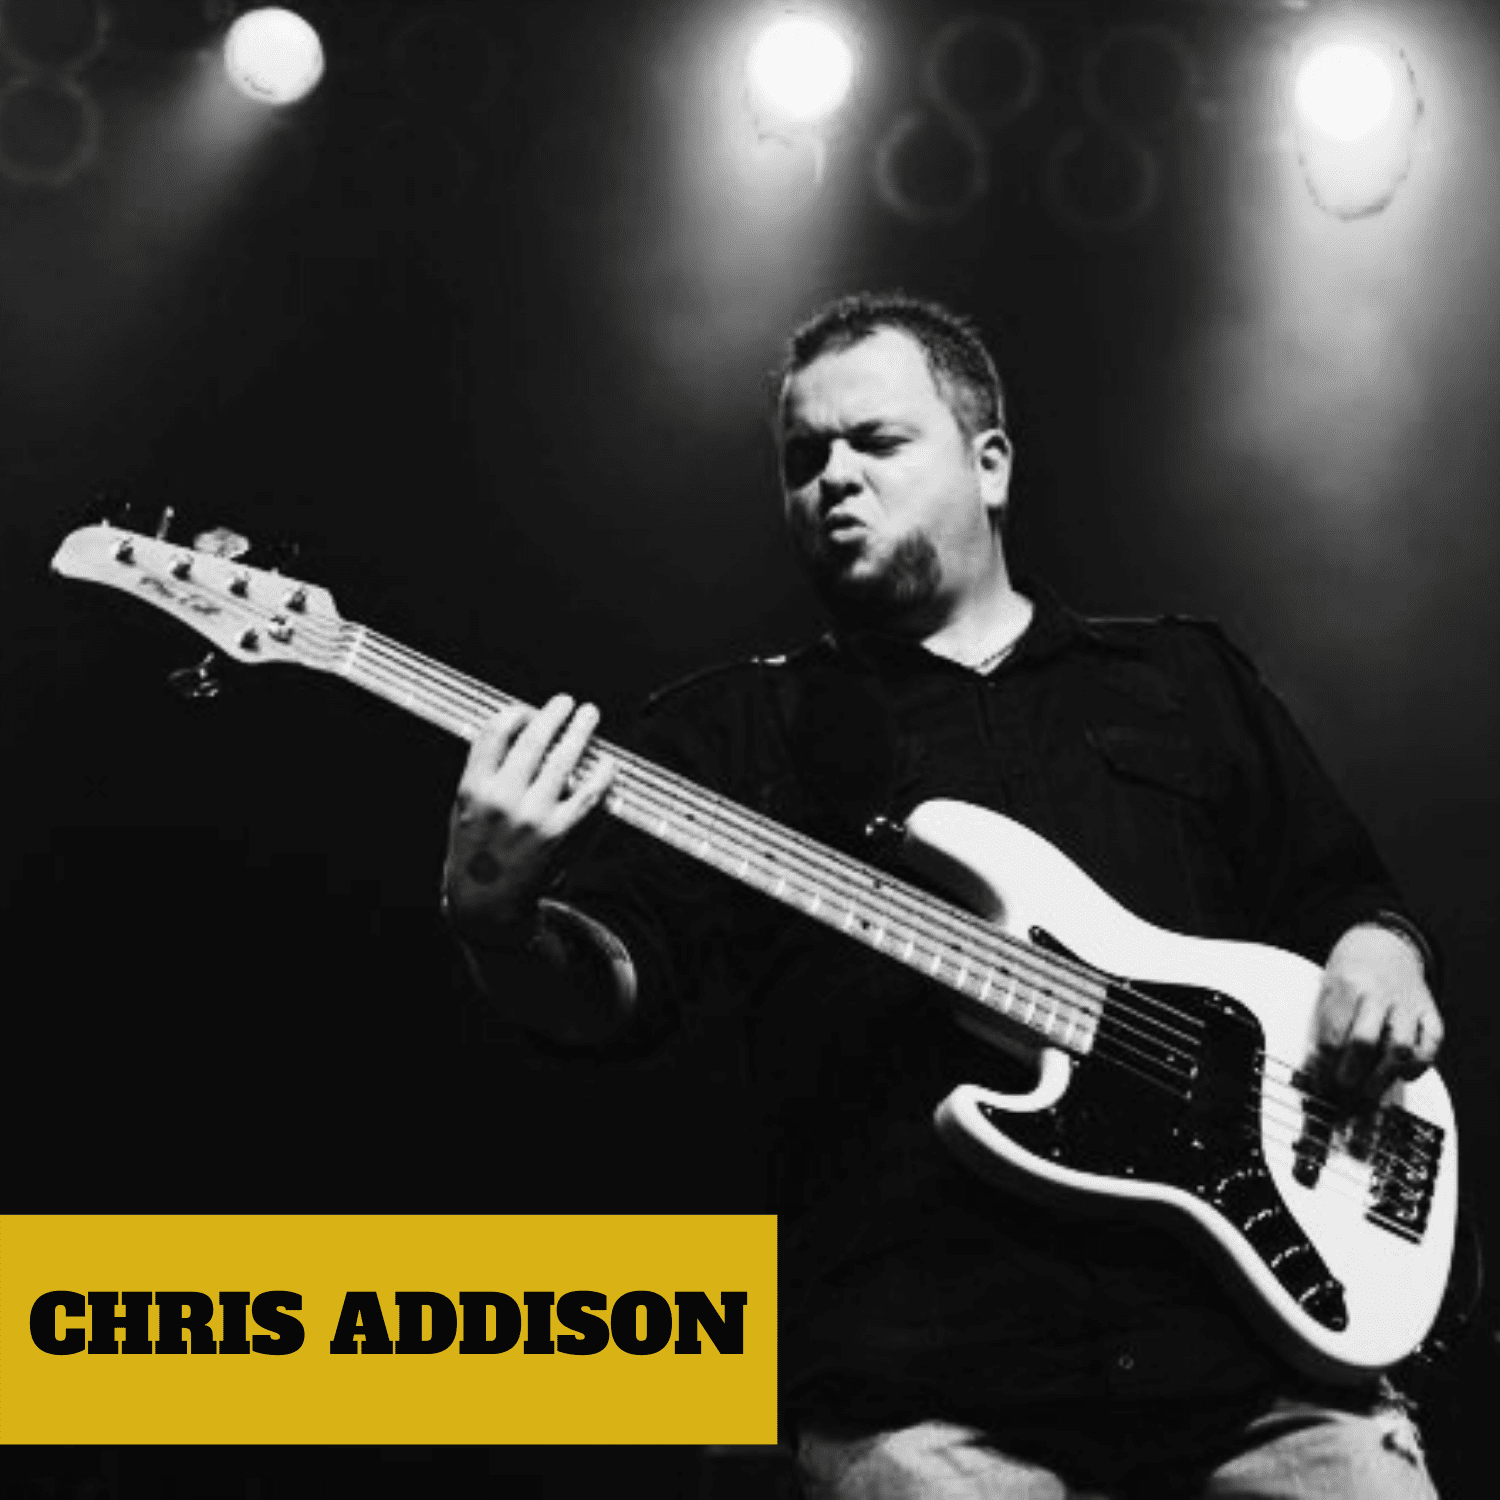 CHRIS ADDISON of the Blues Rock Band Jennifer Lyn & The Groove Revival